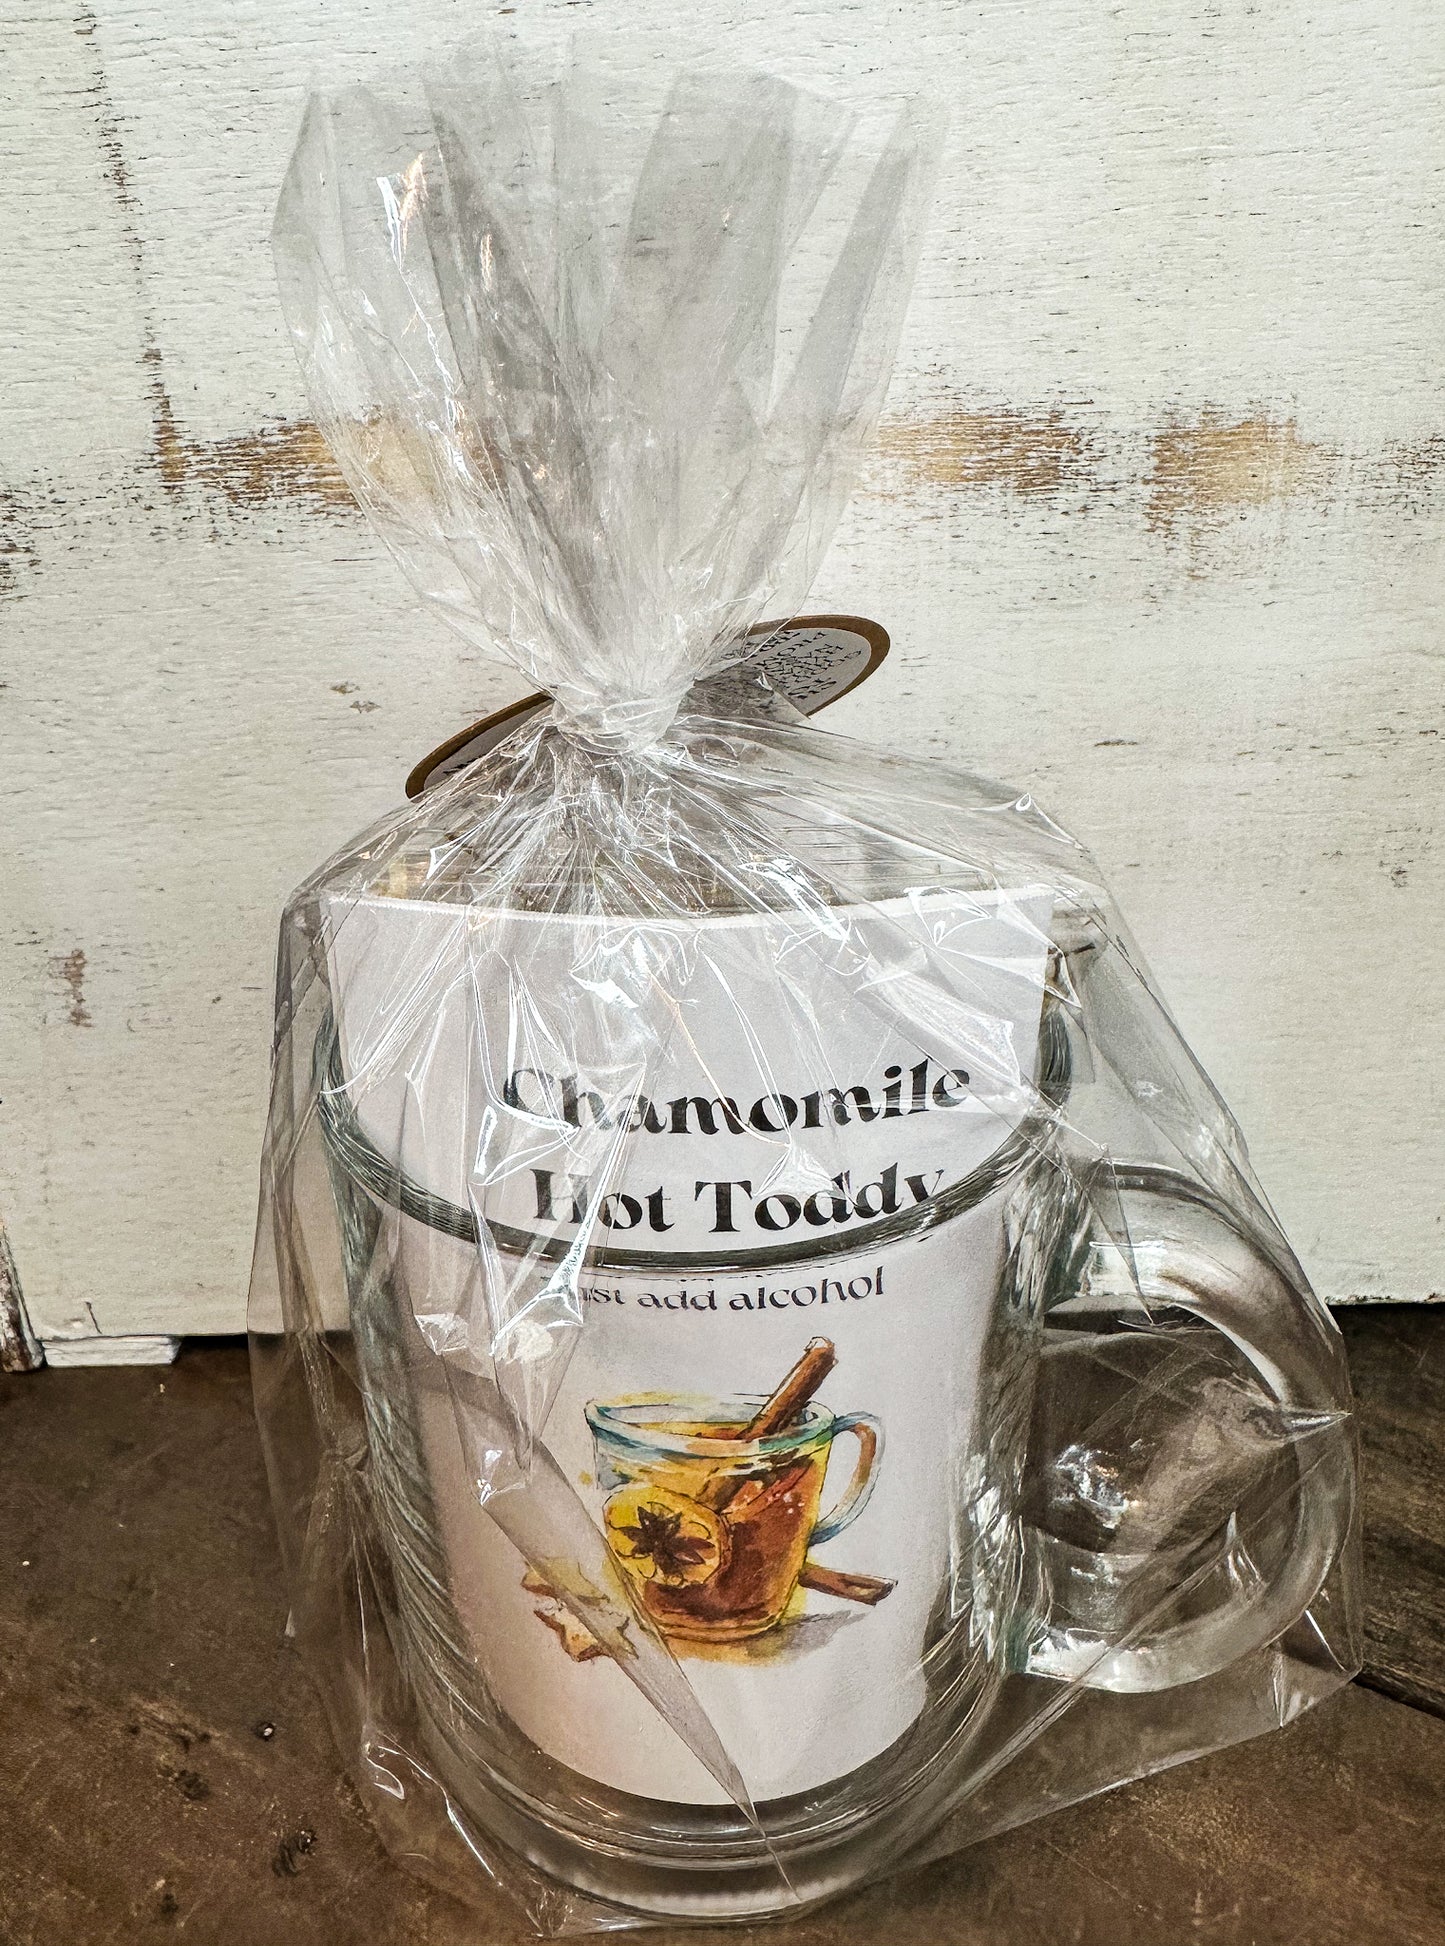 chamomile hot toddy back side gift set with white background and wooden table